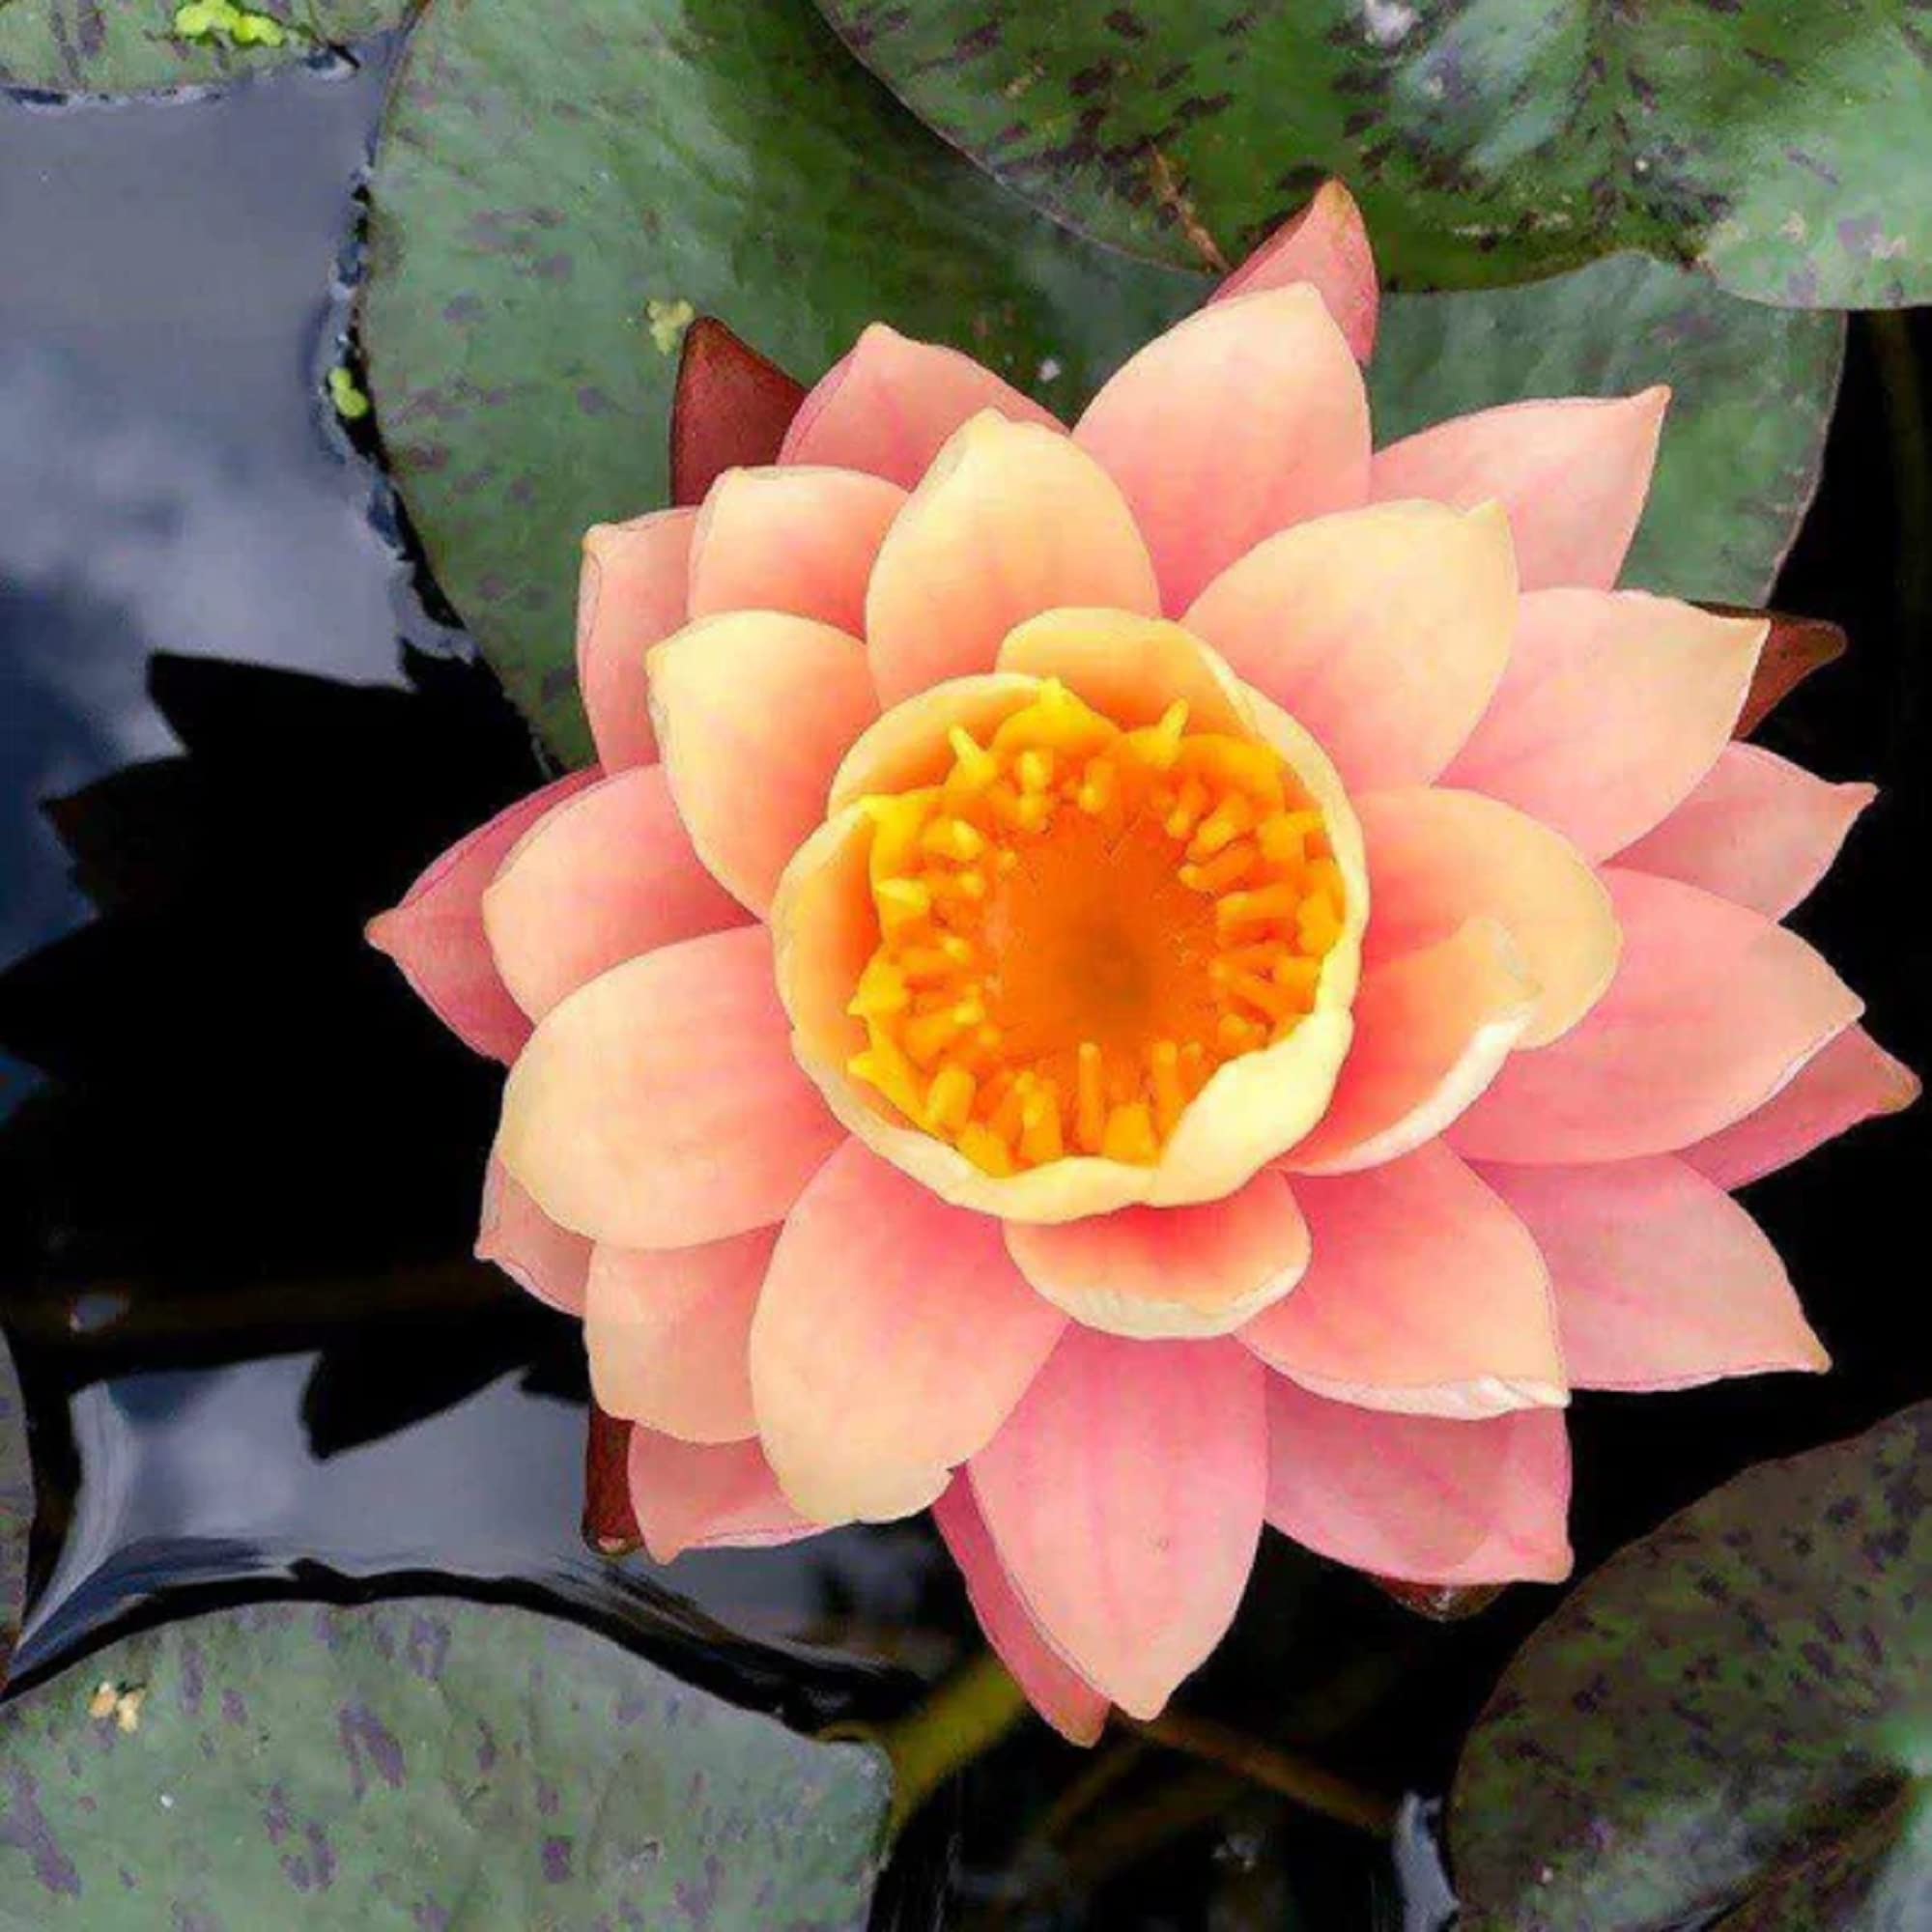 CHUXAY GARDEN Mixed Nymphaeaceae- Water Lilies 10 Seeds Bonsai Multiple Colour Bowl Lotus Seeds Decorative Pond Grows in Just Weeks